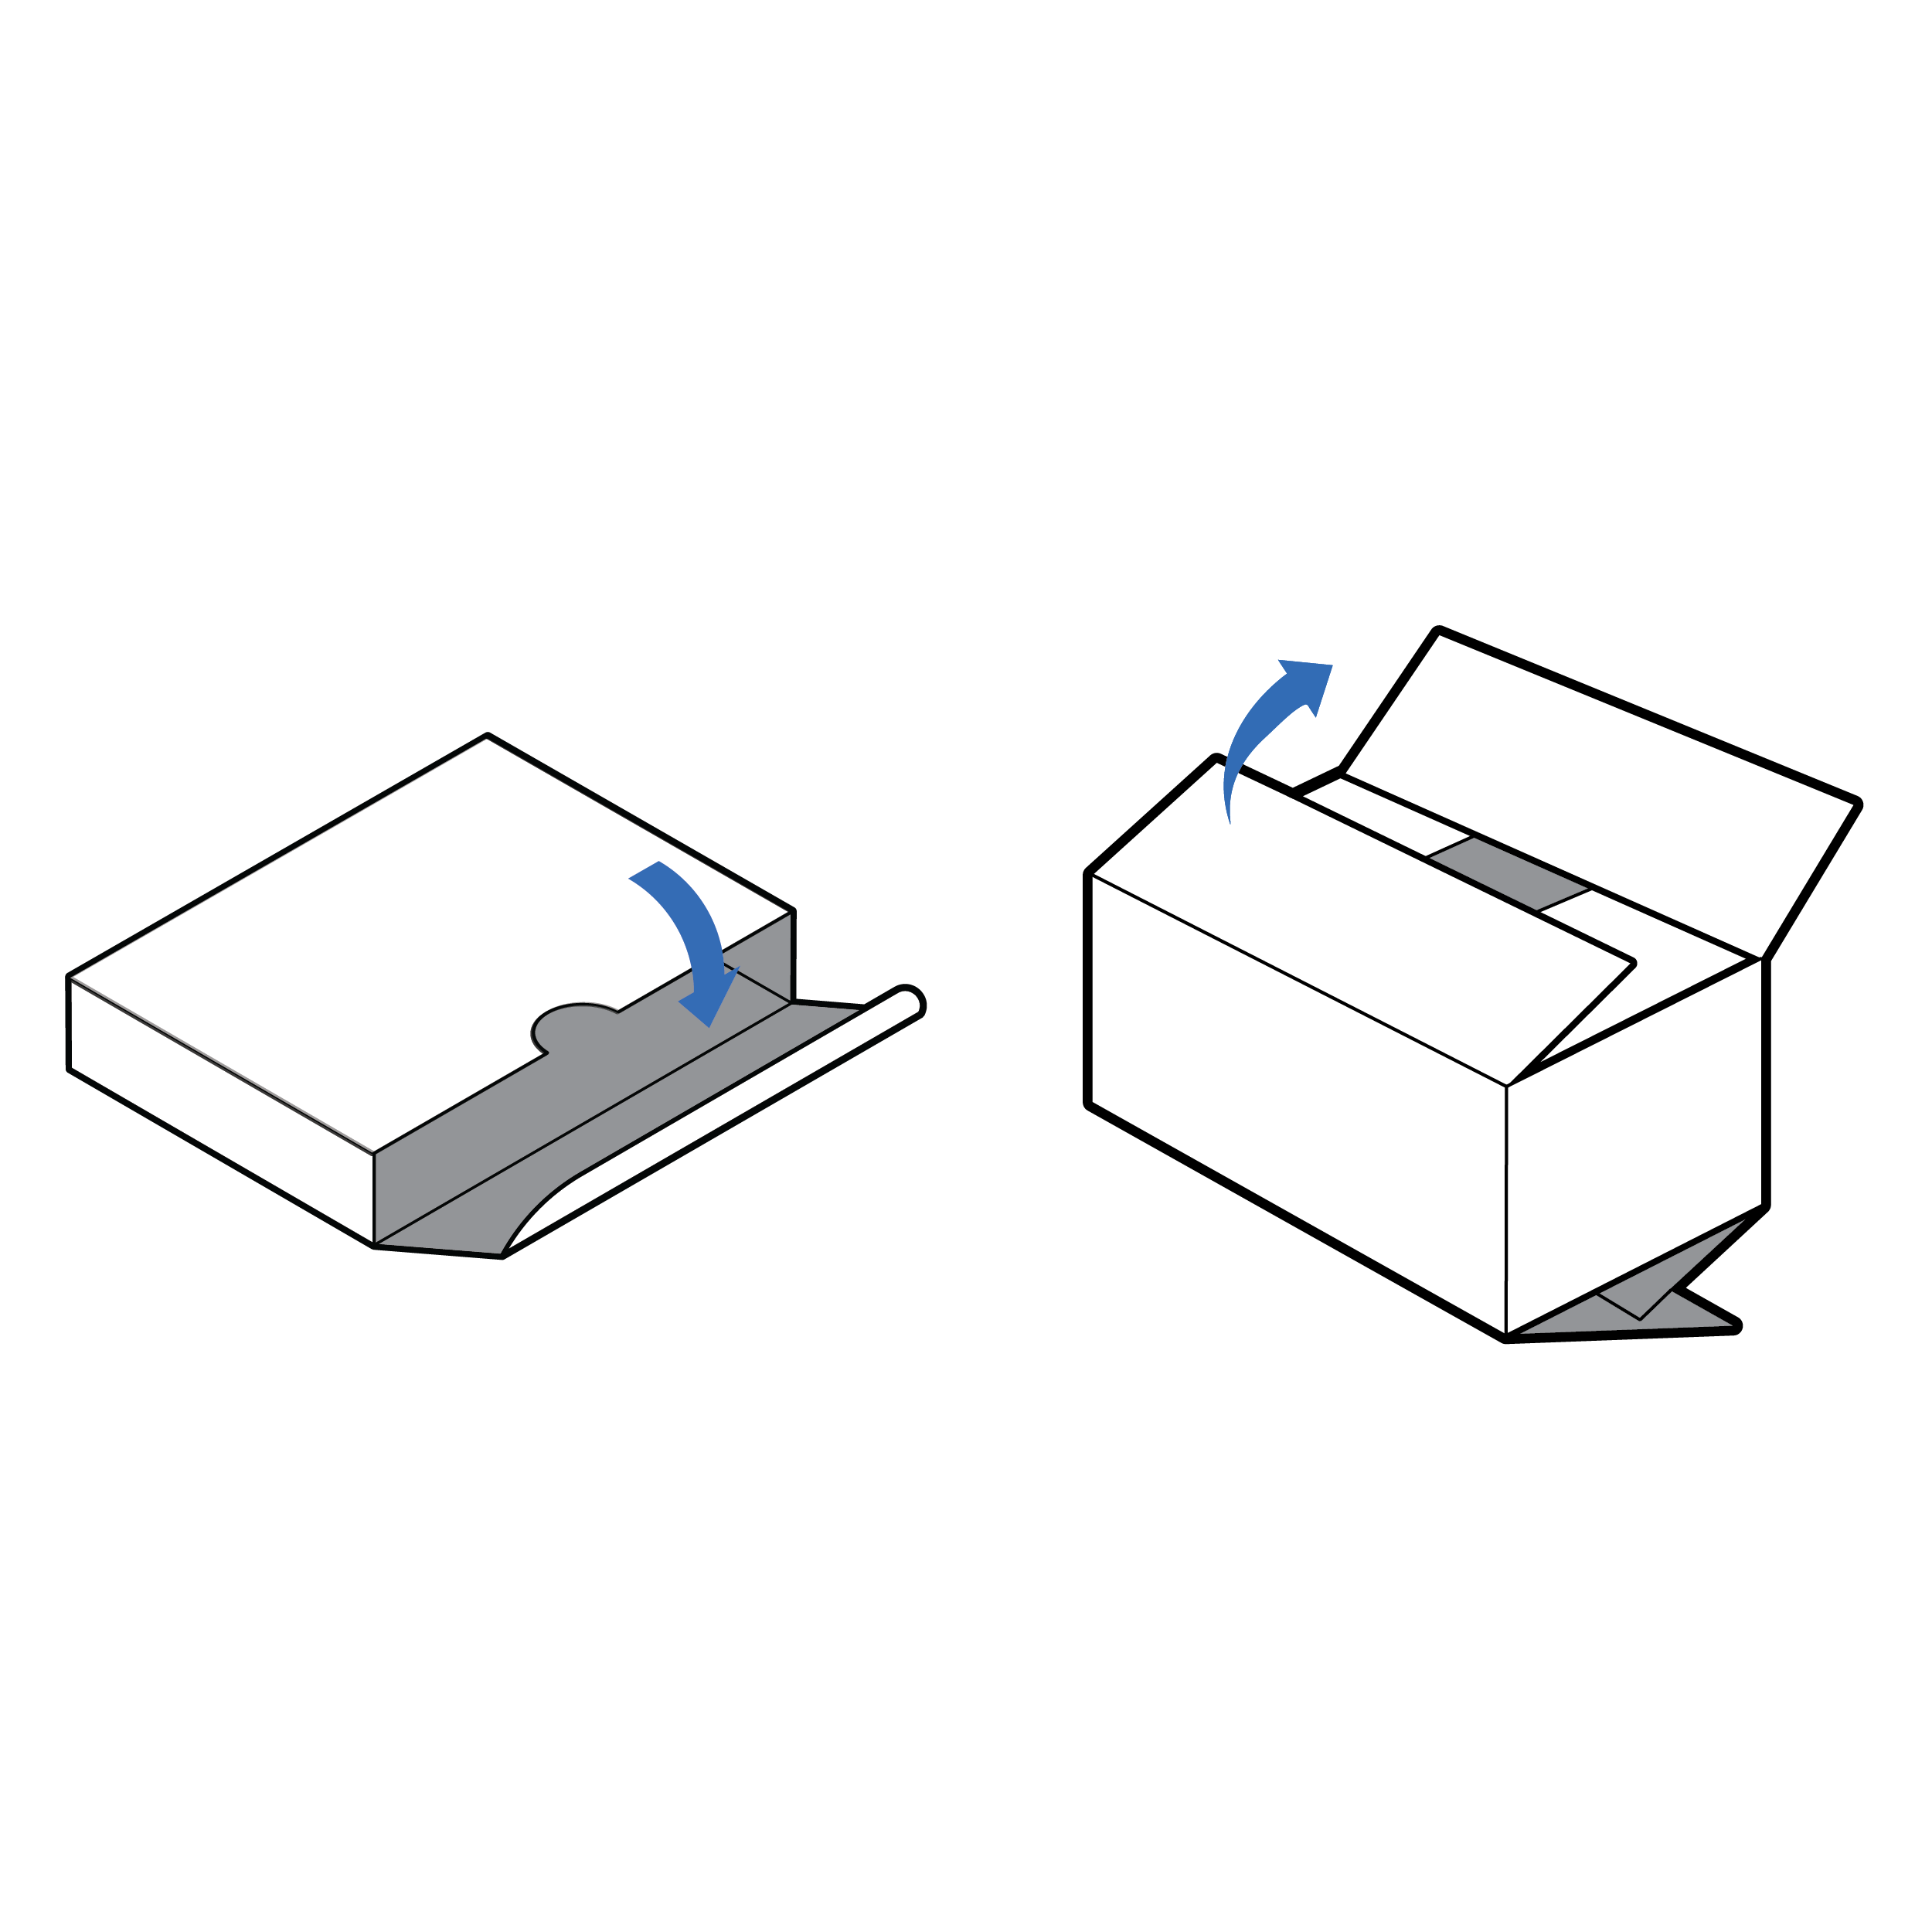 Two test kit boxes with different opening mechanisms – a half-moon thumb cutout and overlapping flaps. Each of the opening mechanisms has an arrow indicating opening motion.